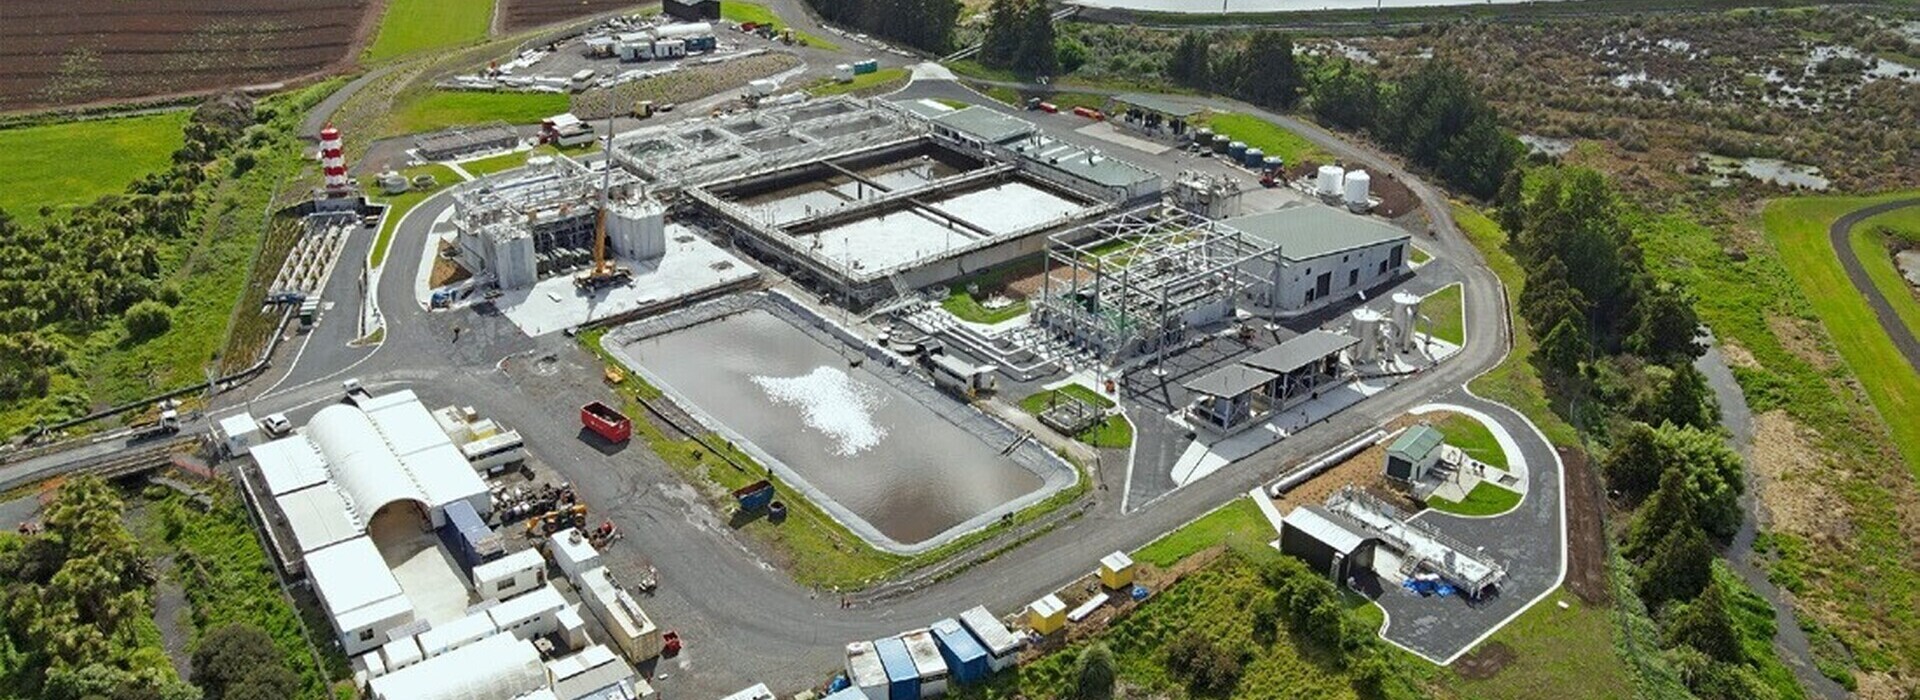 ‘Building Better Not Bigger’ The Pukekohe Wastewater Treatment Plant